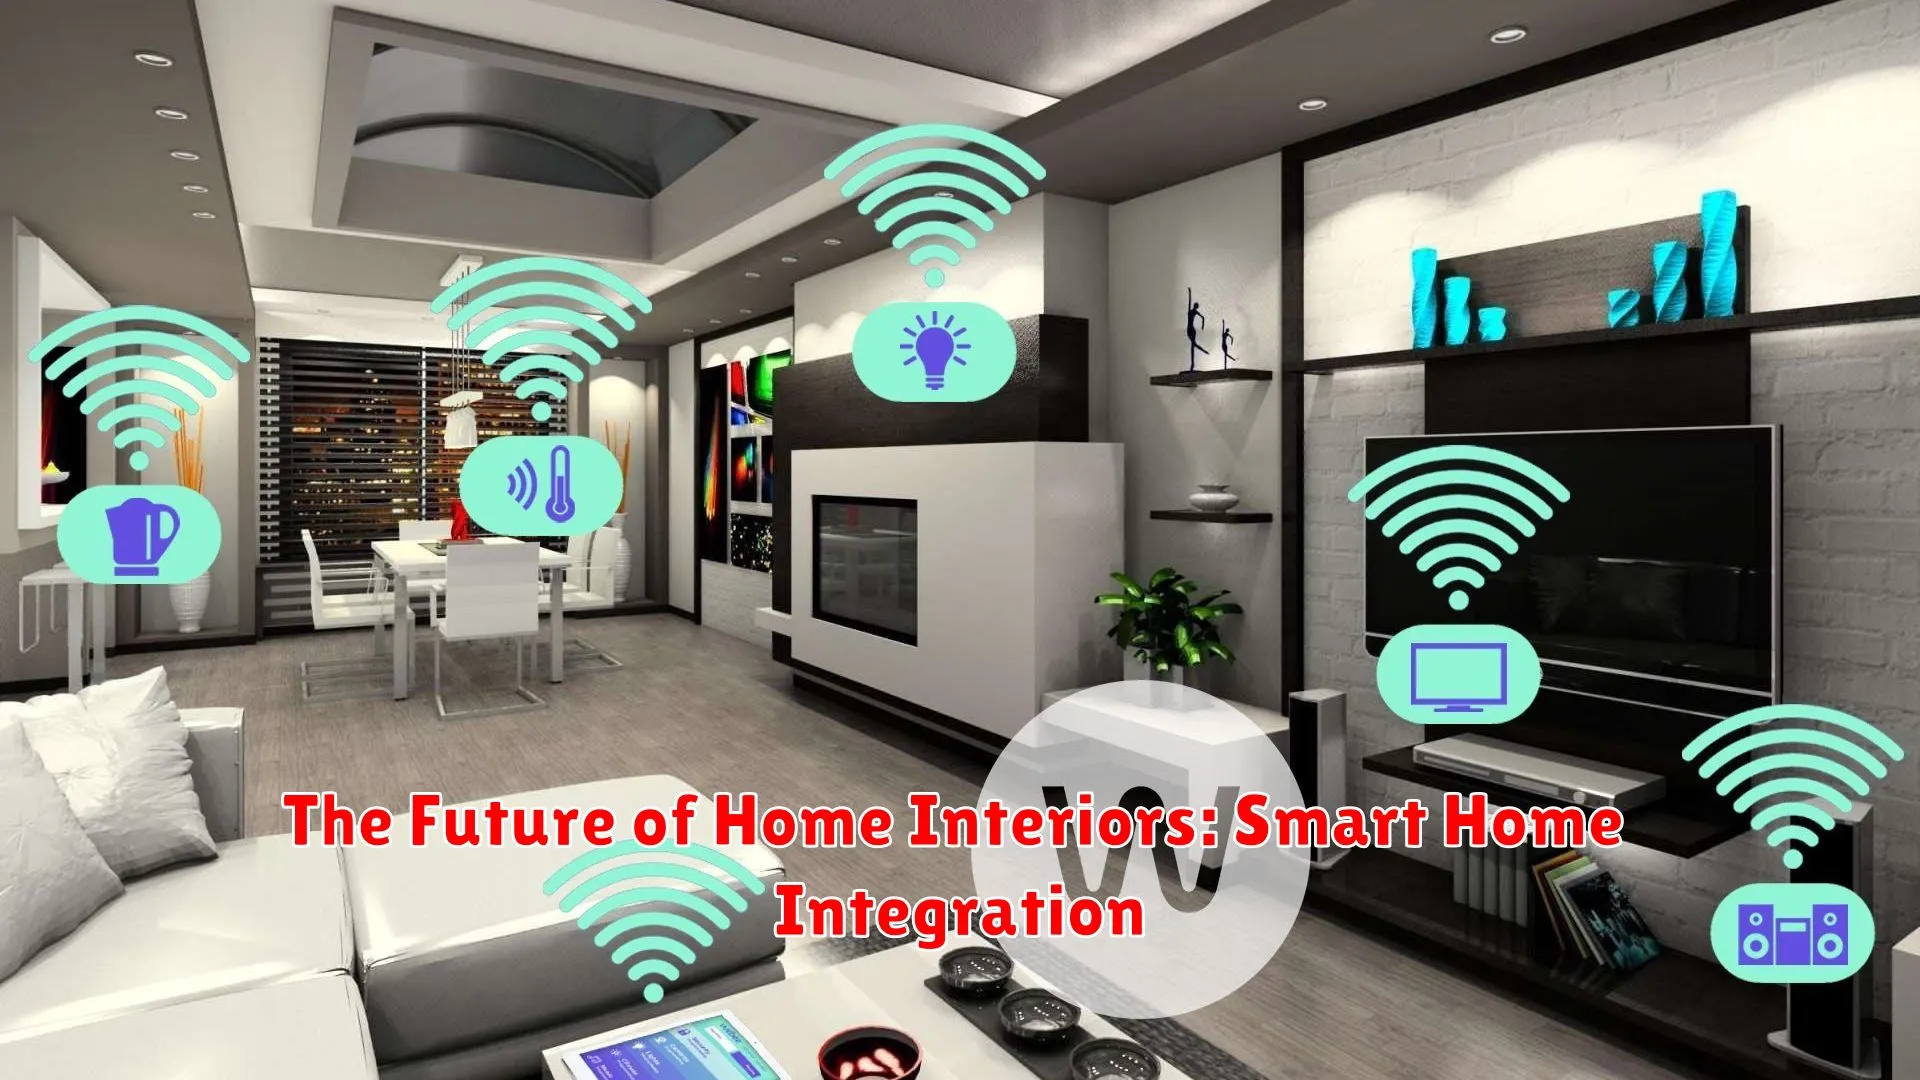 The Future of Home Interiors: Smart Home Integration